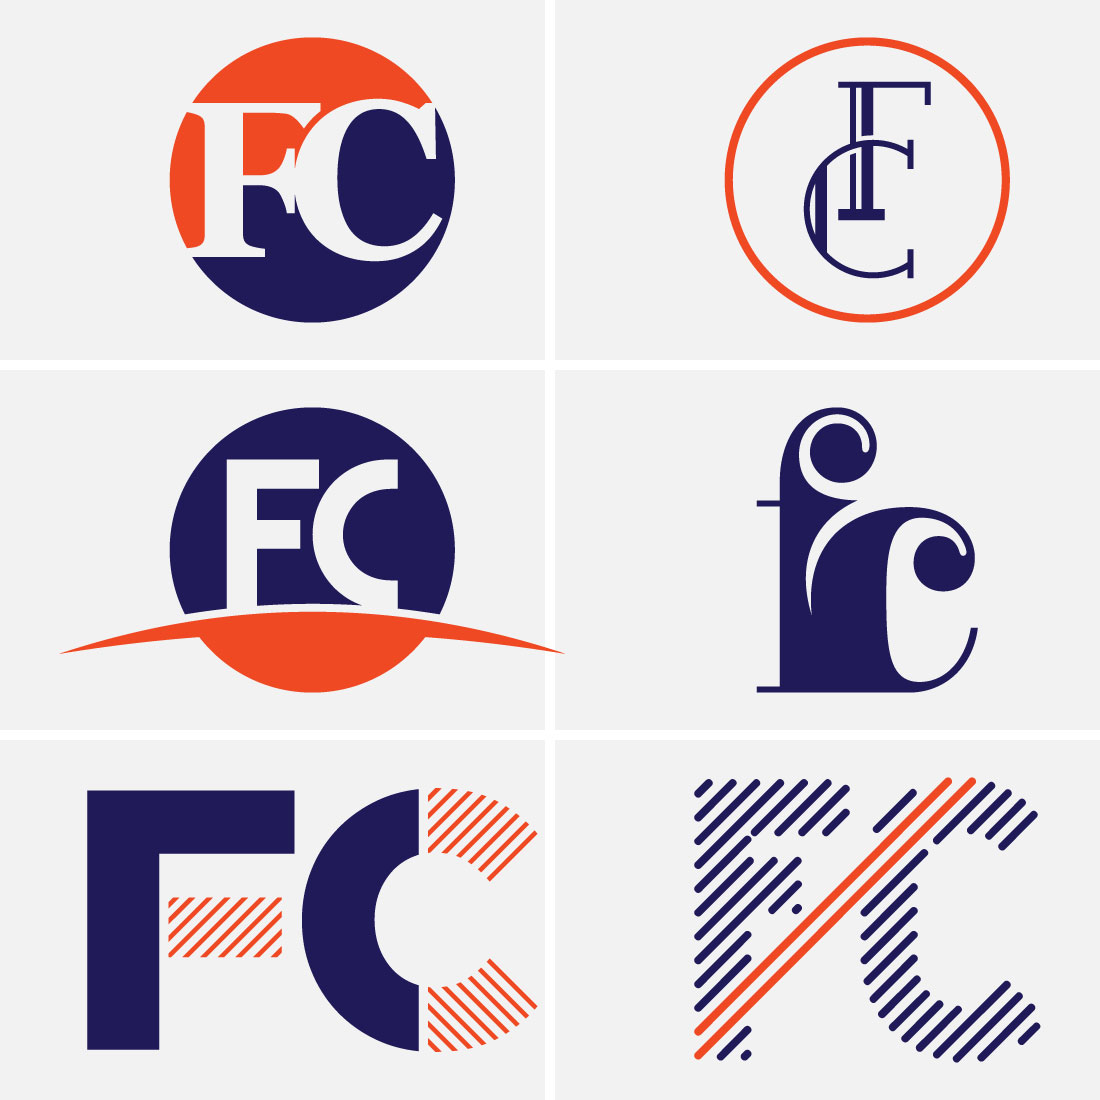 Initial Letter F C Logo Design Vector Template cover image.